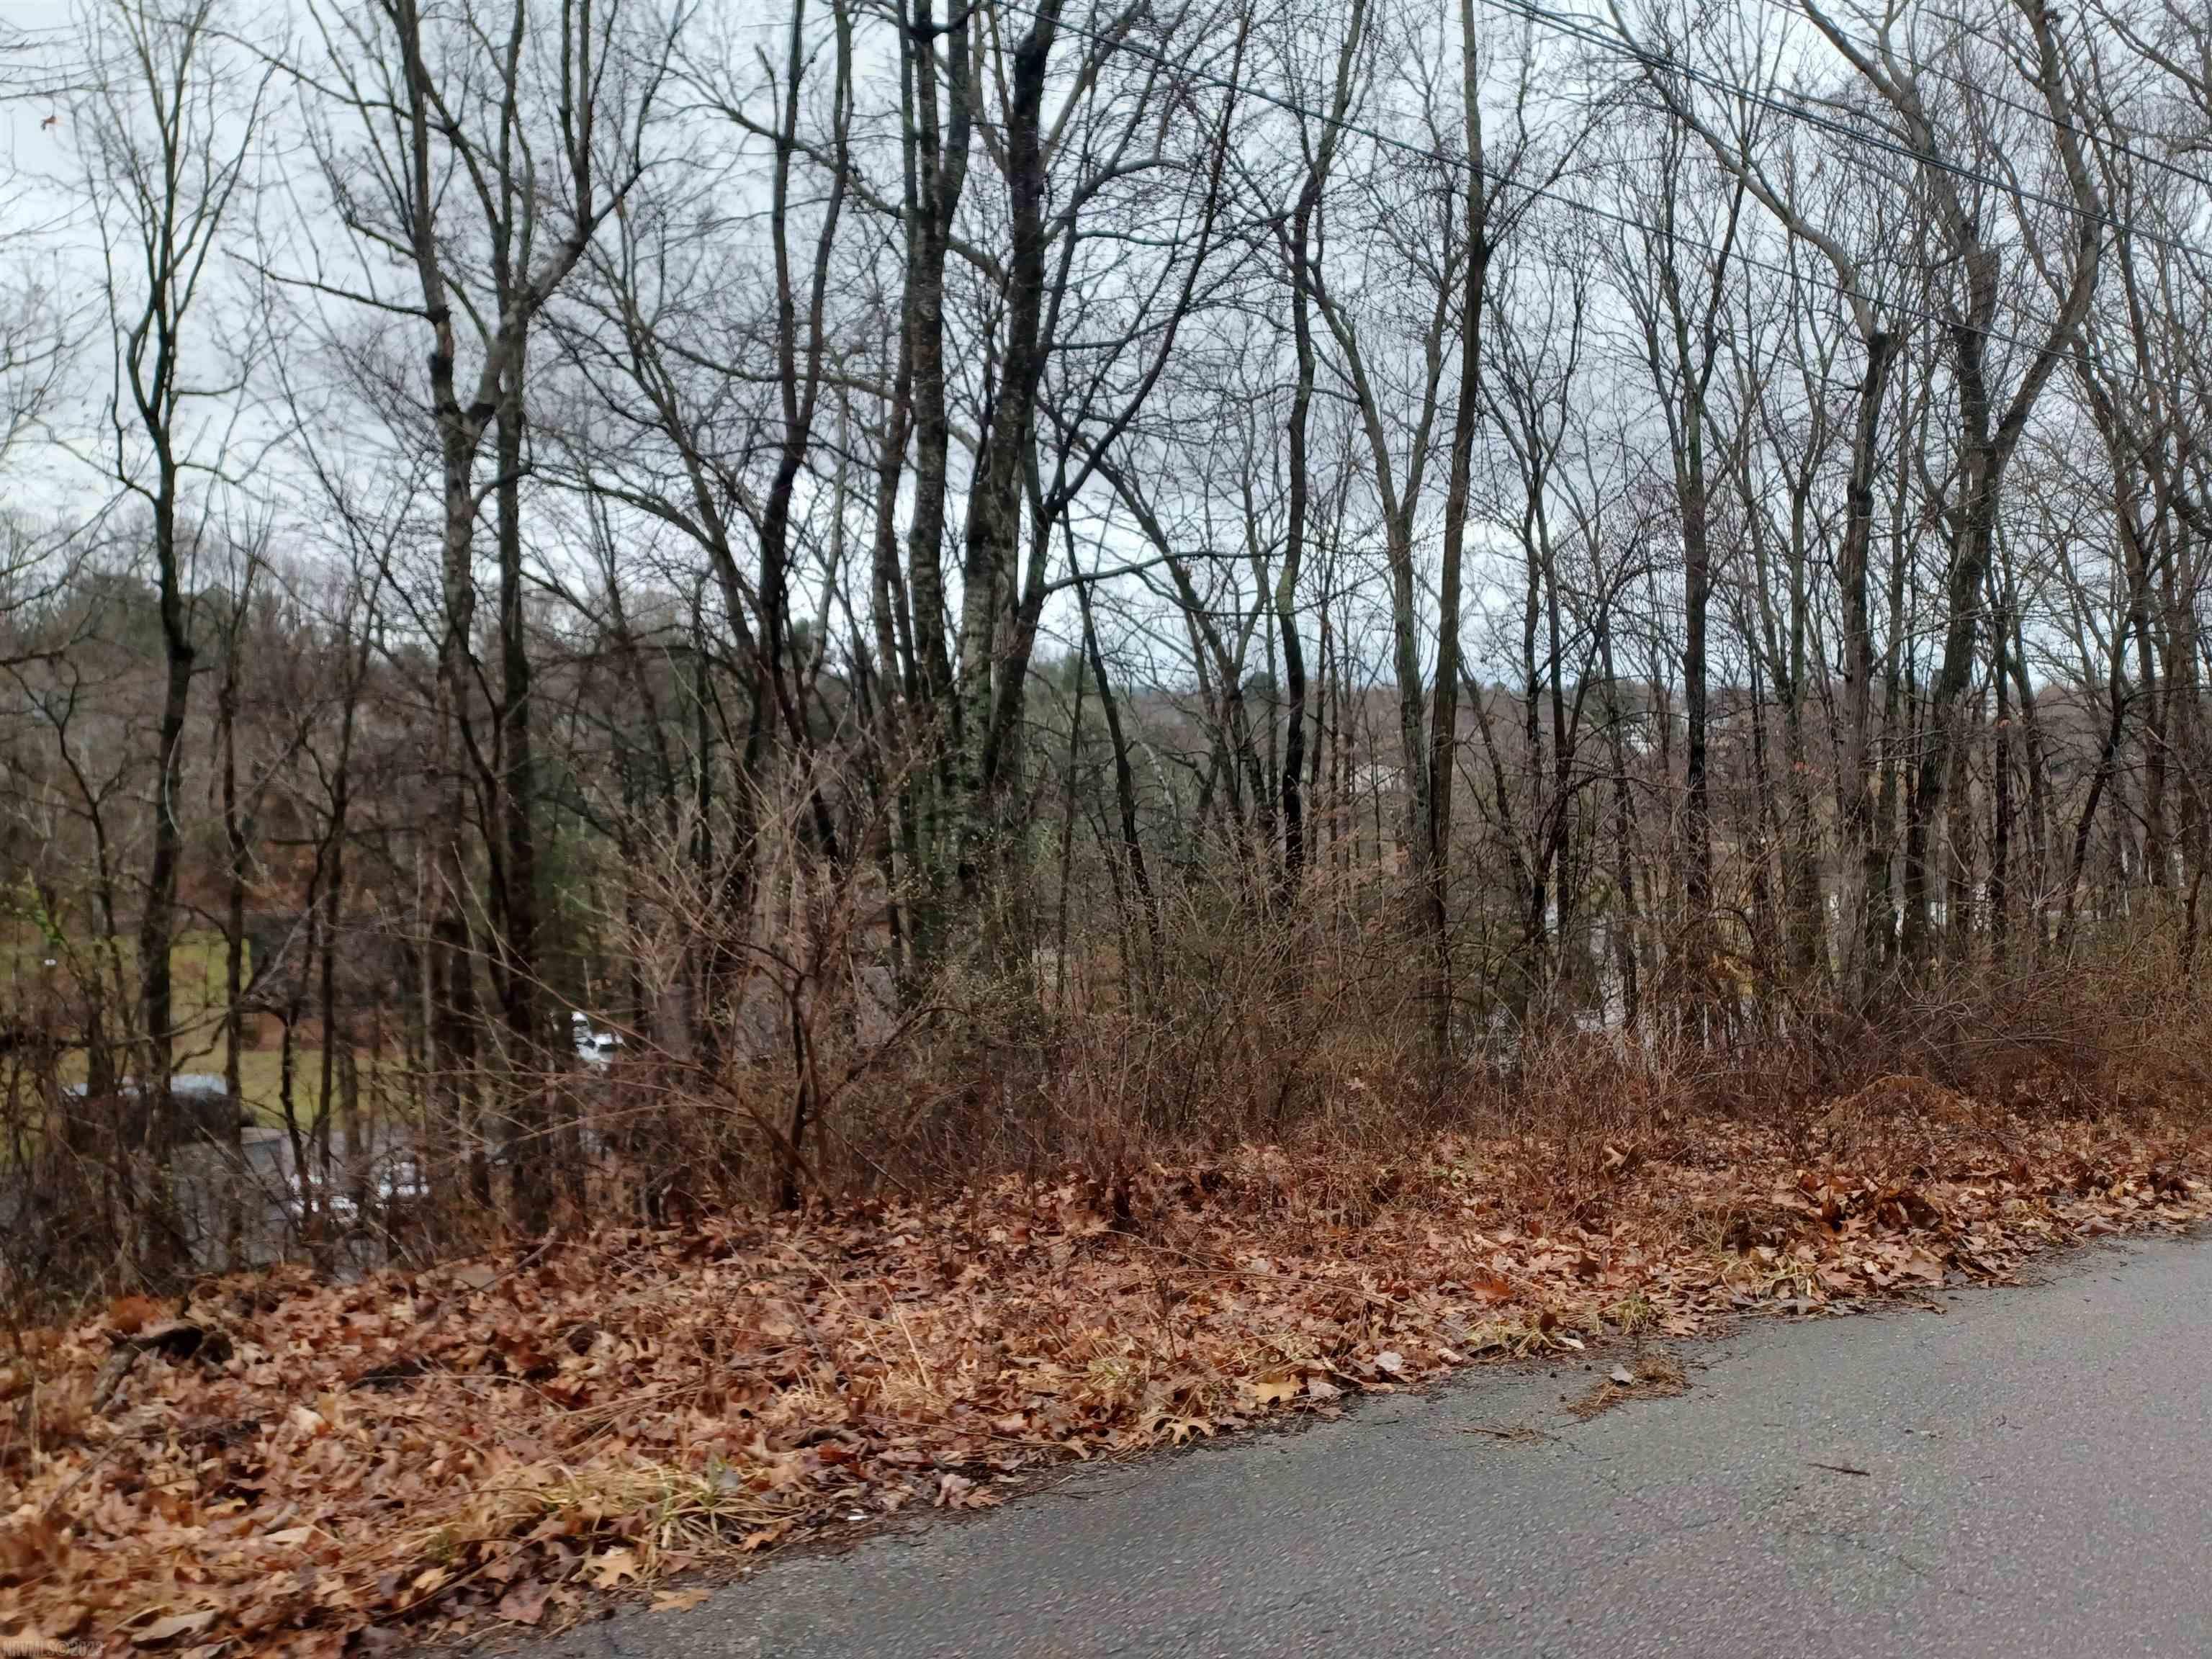 Can't find a home to purchase? Consider building! This wooded lot is ready for your new home!  Public water/sewer and natural gas available. Very convenient location with easy access to I-81 and a quick drive to downtown, shopping, restaurants and Virginia Tech.